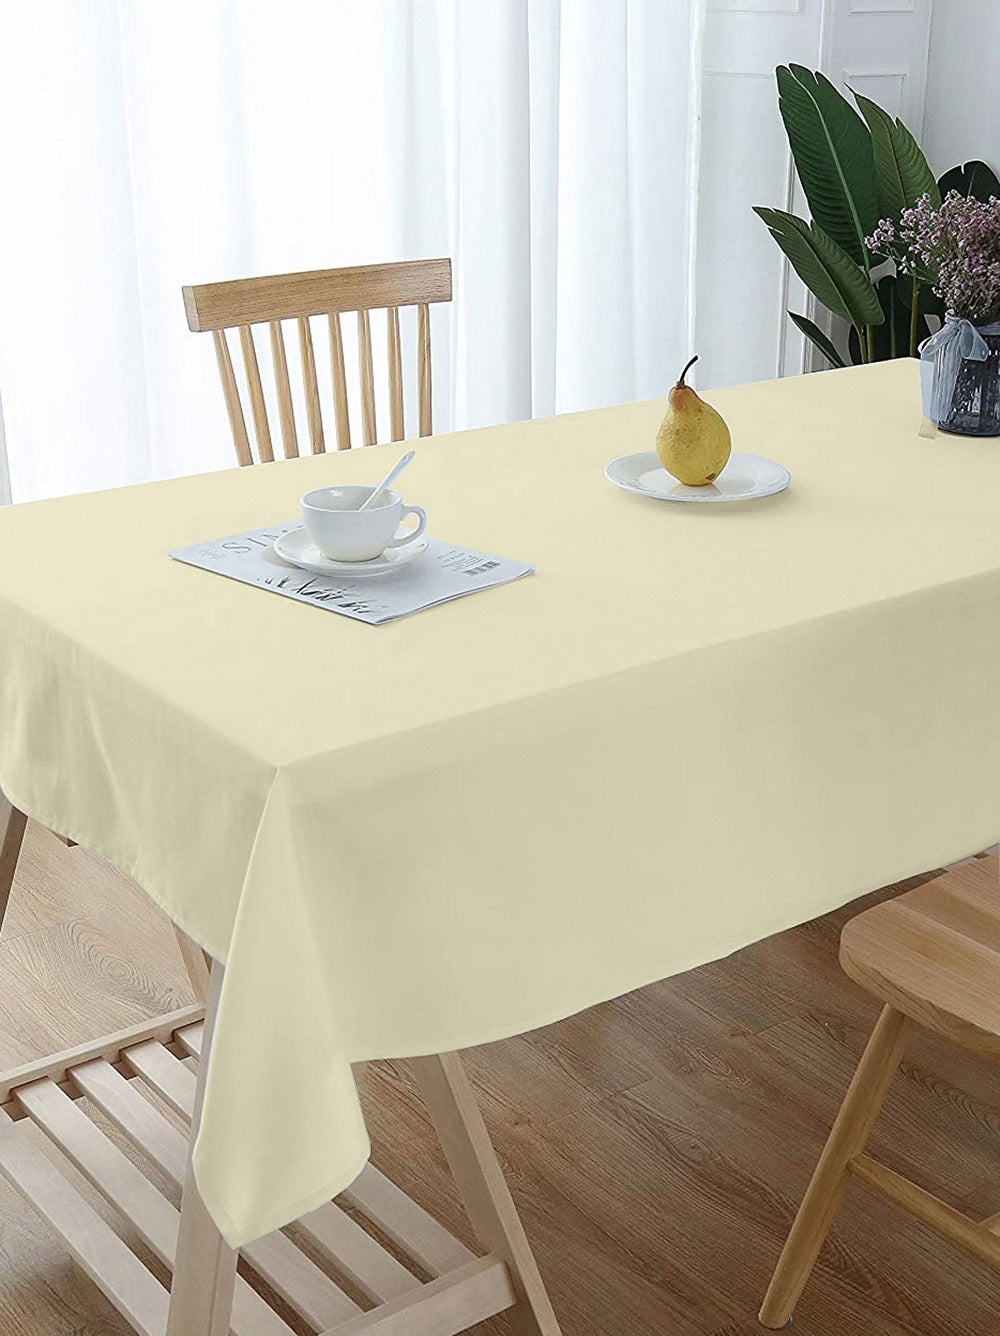 Lushomes dining table cover 6 seater, Beige Classic Plain Dining Table Cover Cloth, table cloth for 6 seater dining table, table cover 6 seater (Size 60 x 70”, 6 Seater Table Cloth)